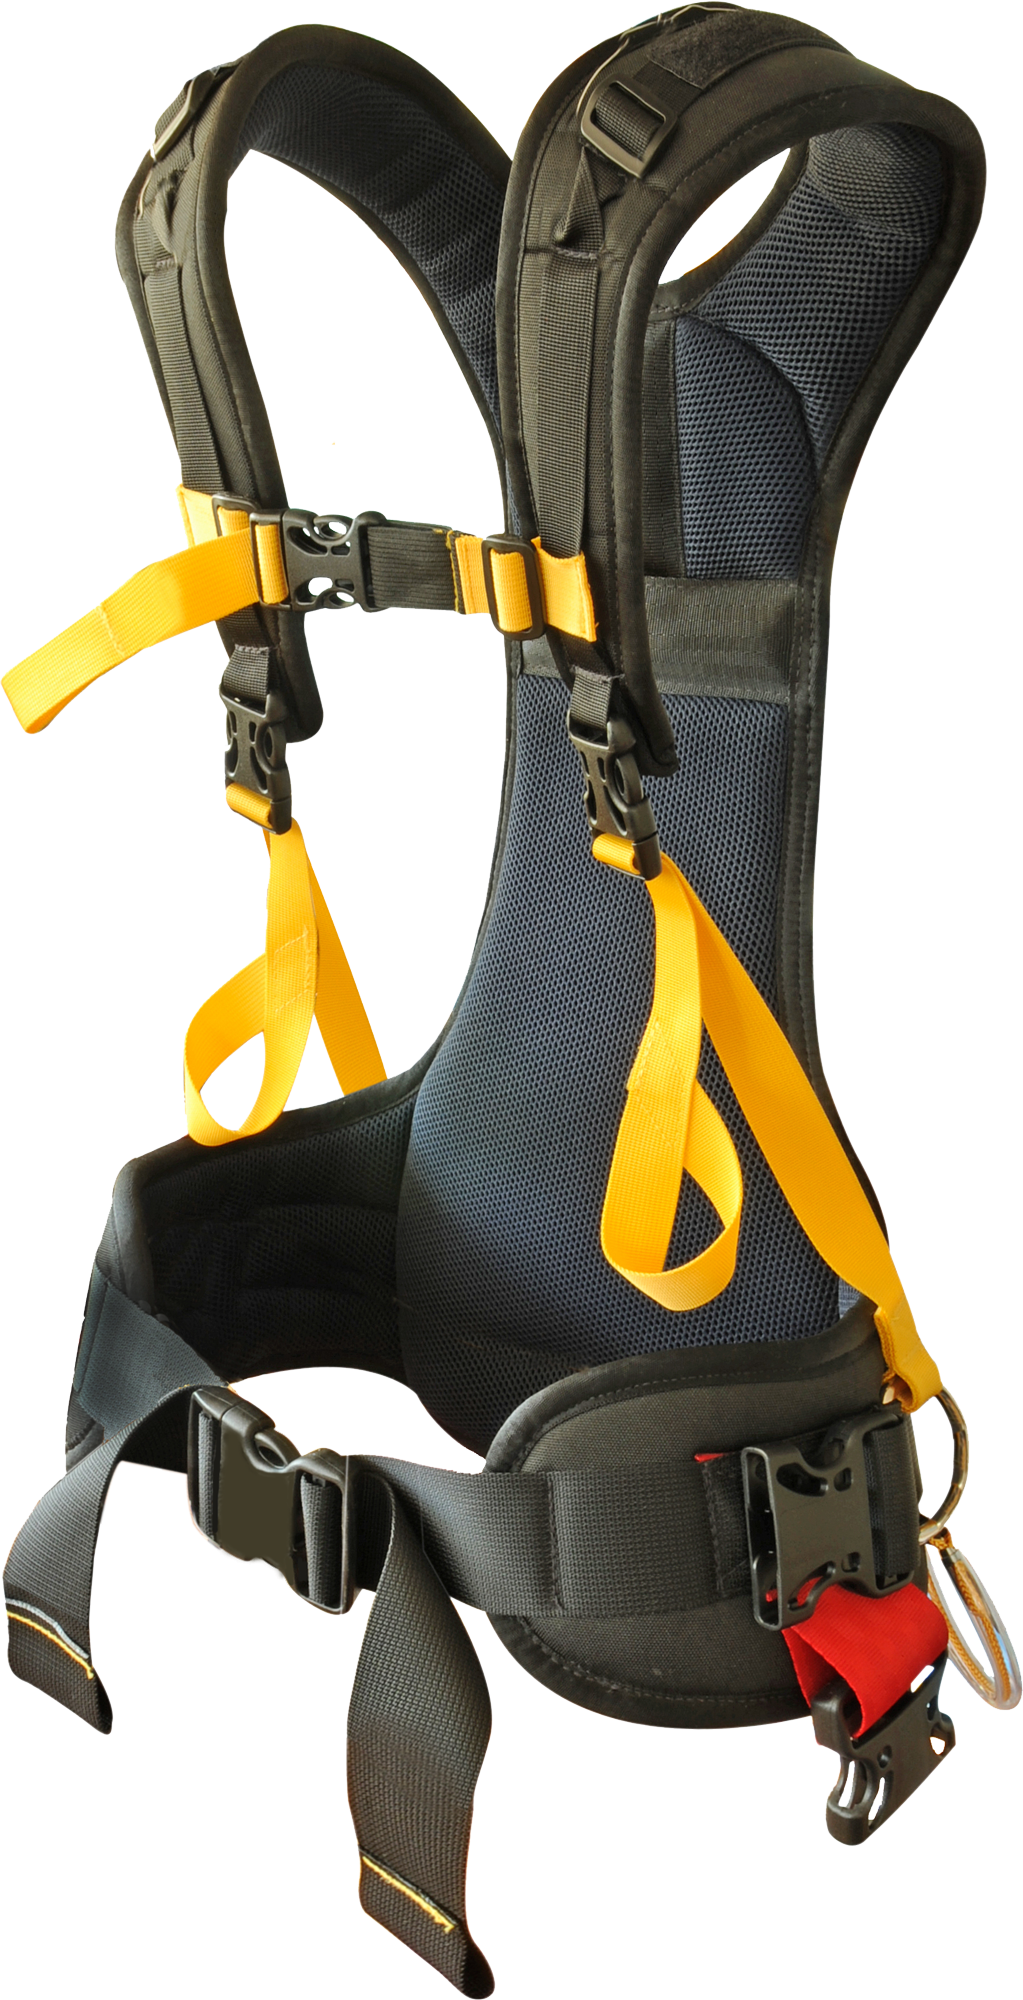 https://icetrek.com/uploads/products/Sled-Harness/Atlas/Promotional/Atlas-Sled_Harness_Front.png